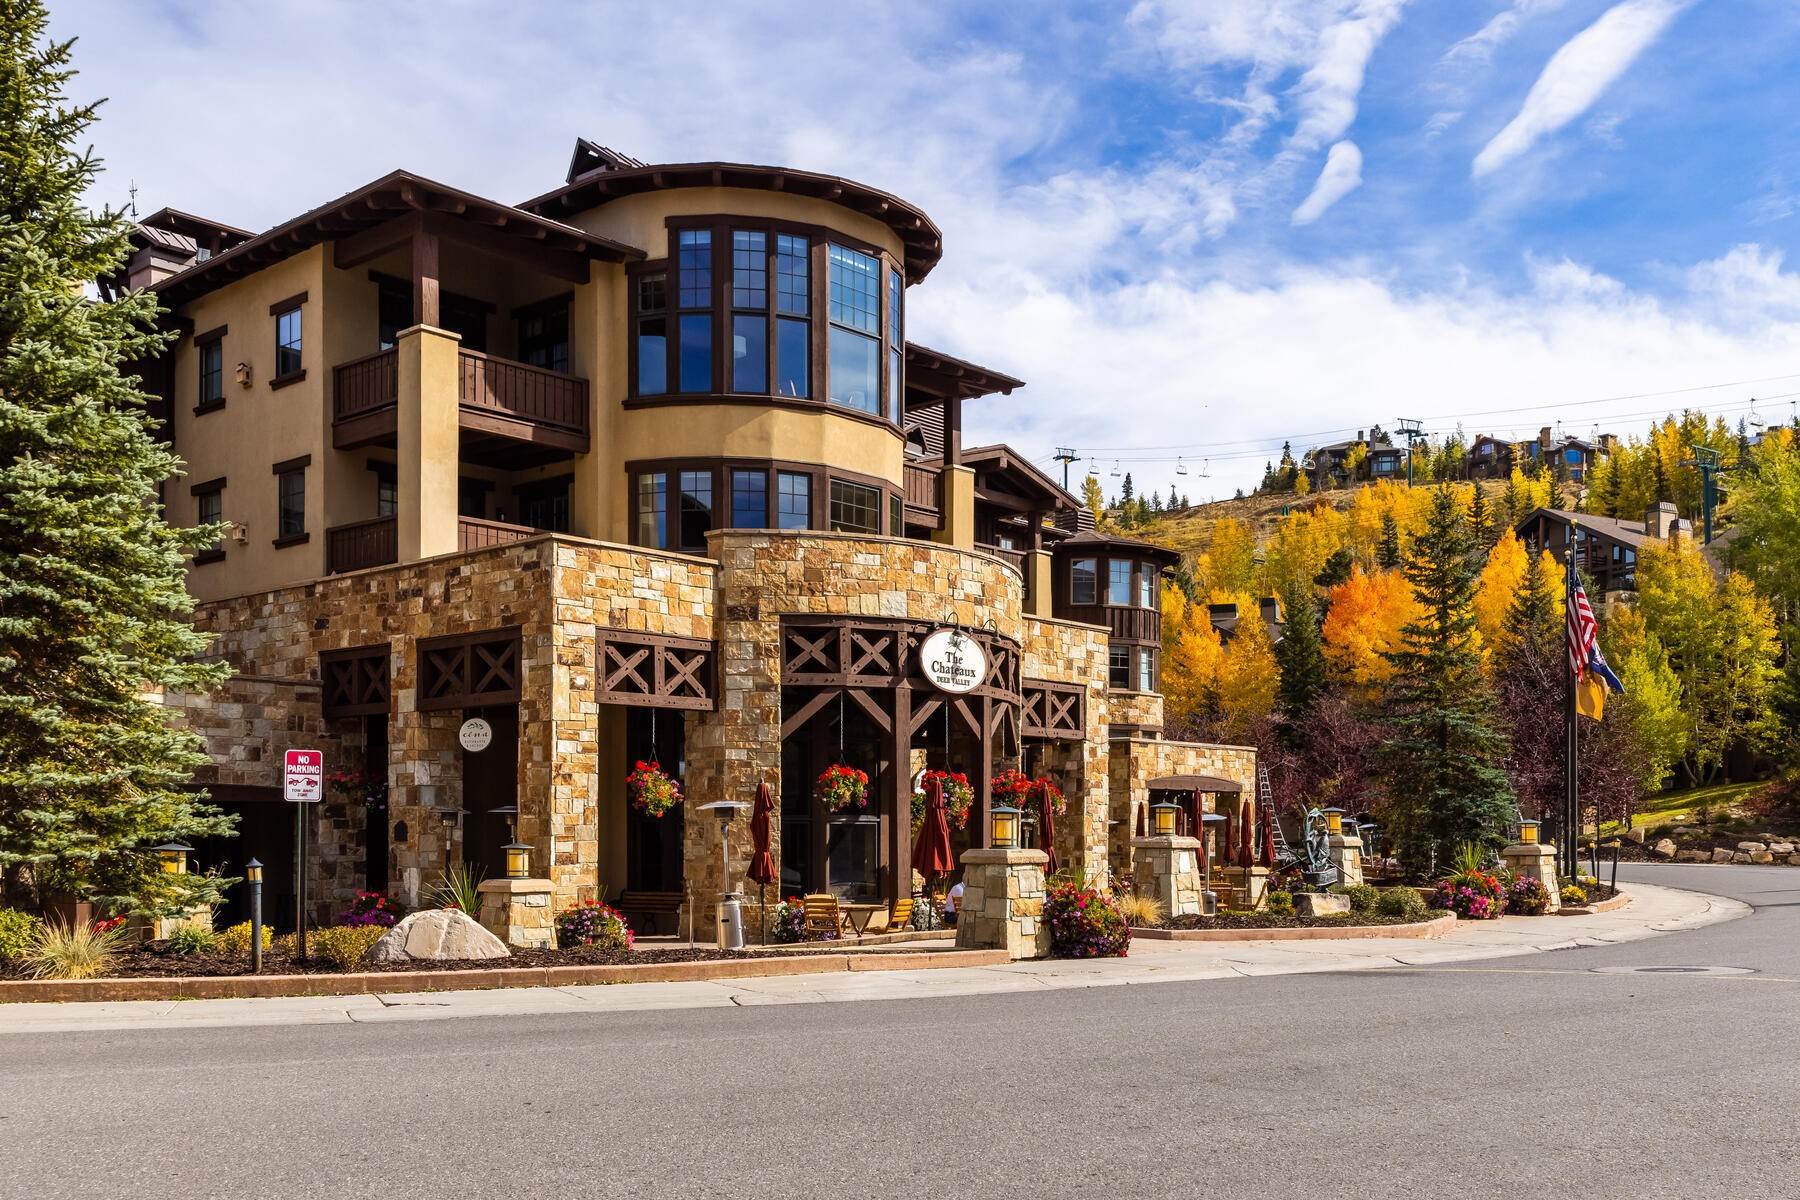 Fractional Ownership Property for Sale at Steps from Deer Valley's Silver Lake Lodge and Ski Lifts 7815 Royal Street, C359 Park City, Utah 84060 United States